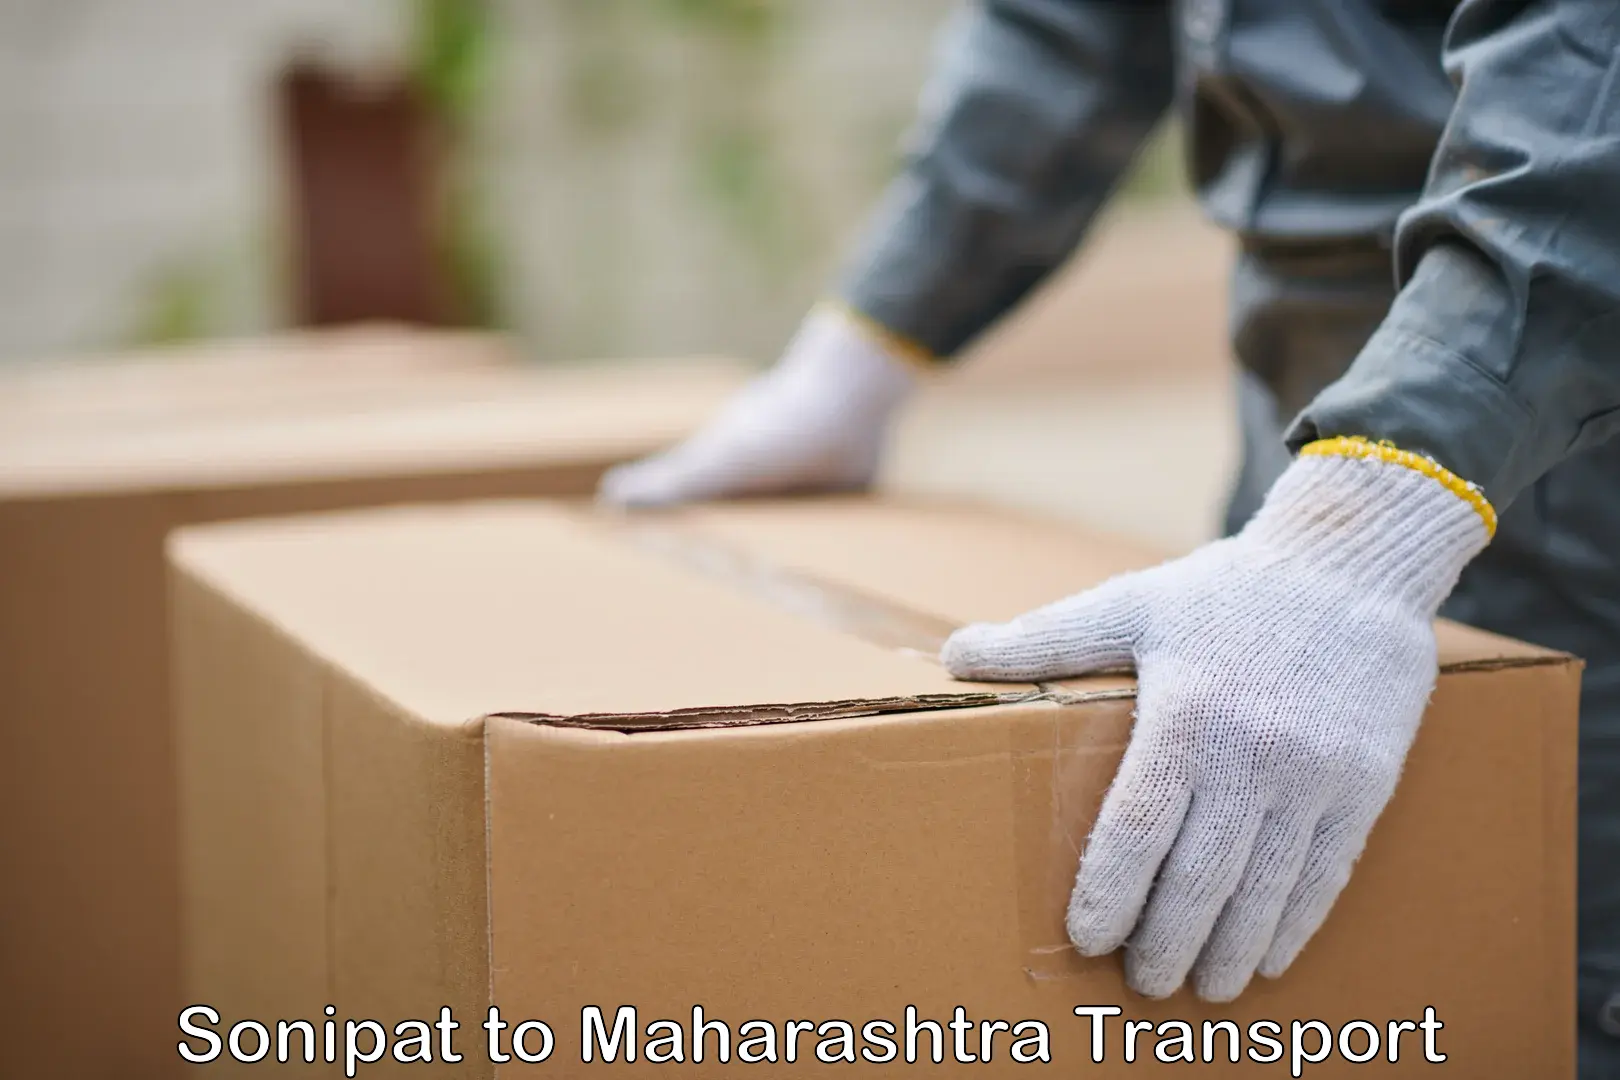 Commercial transport service Sonipat to Junnar